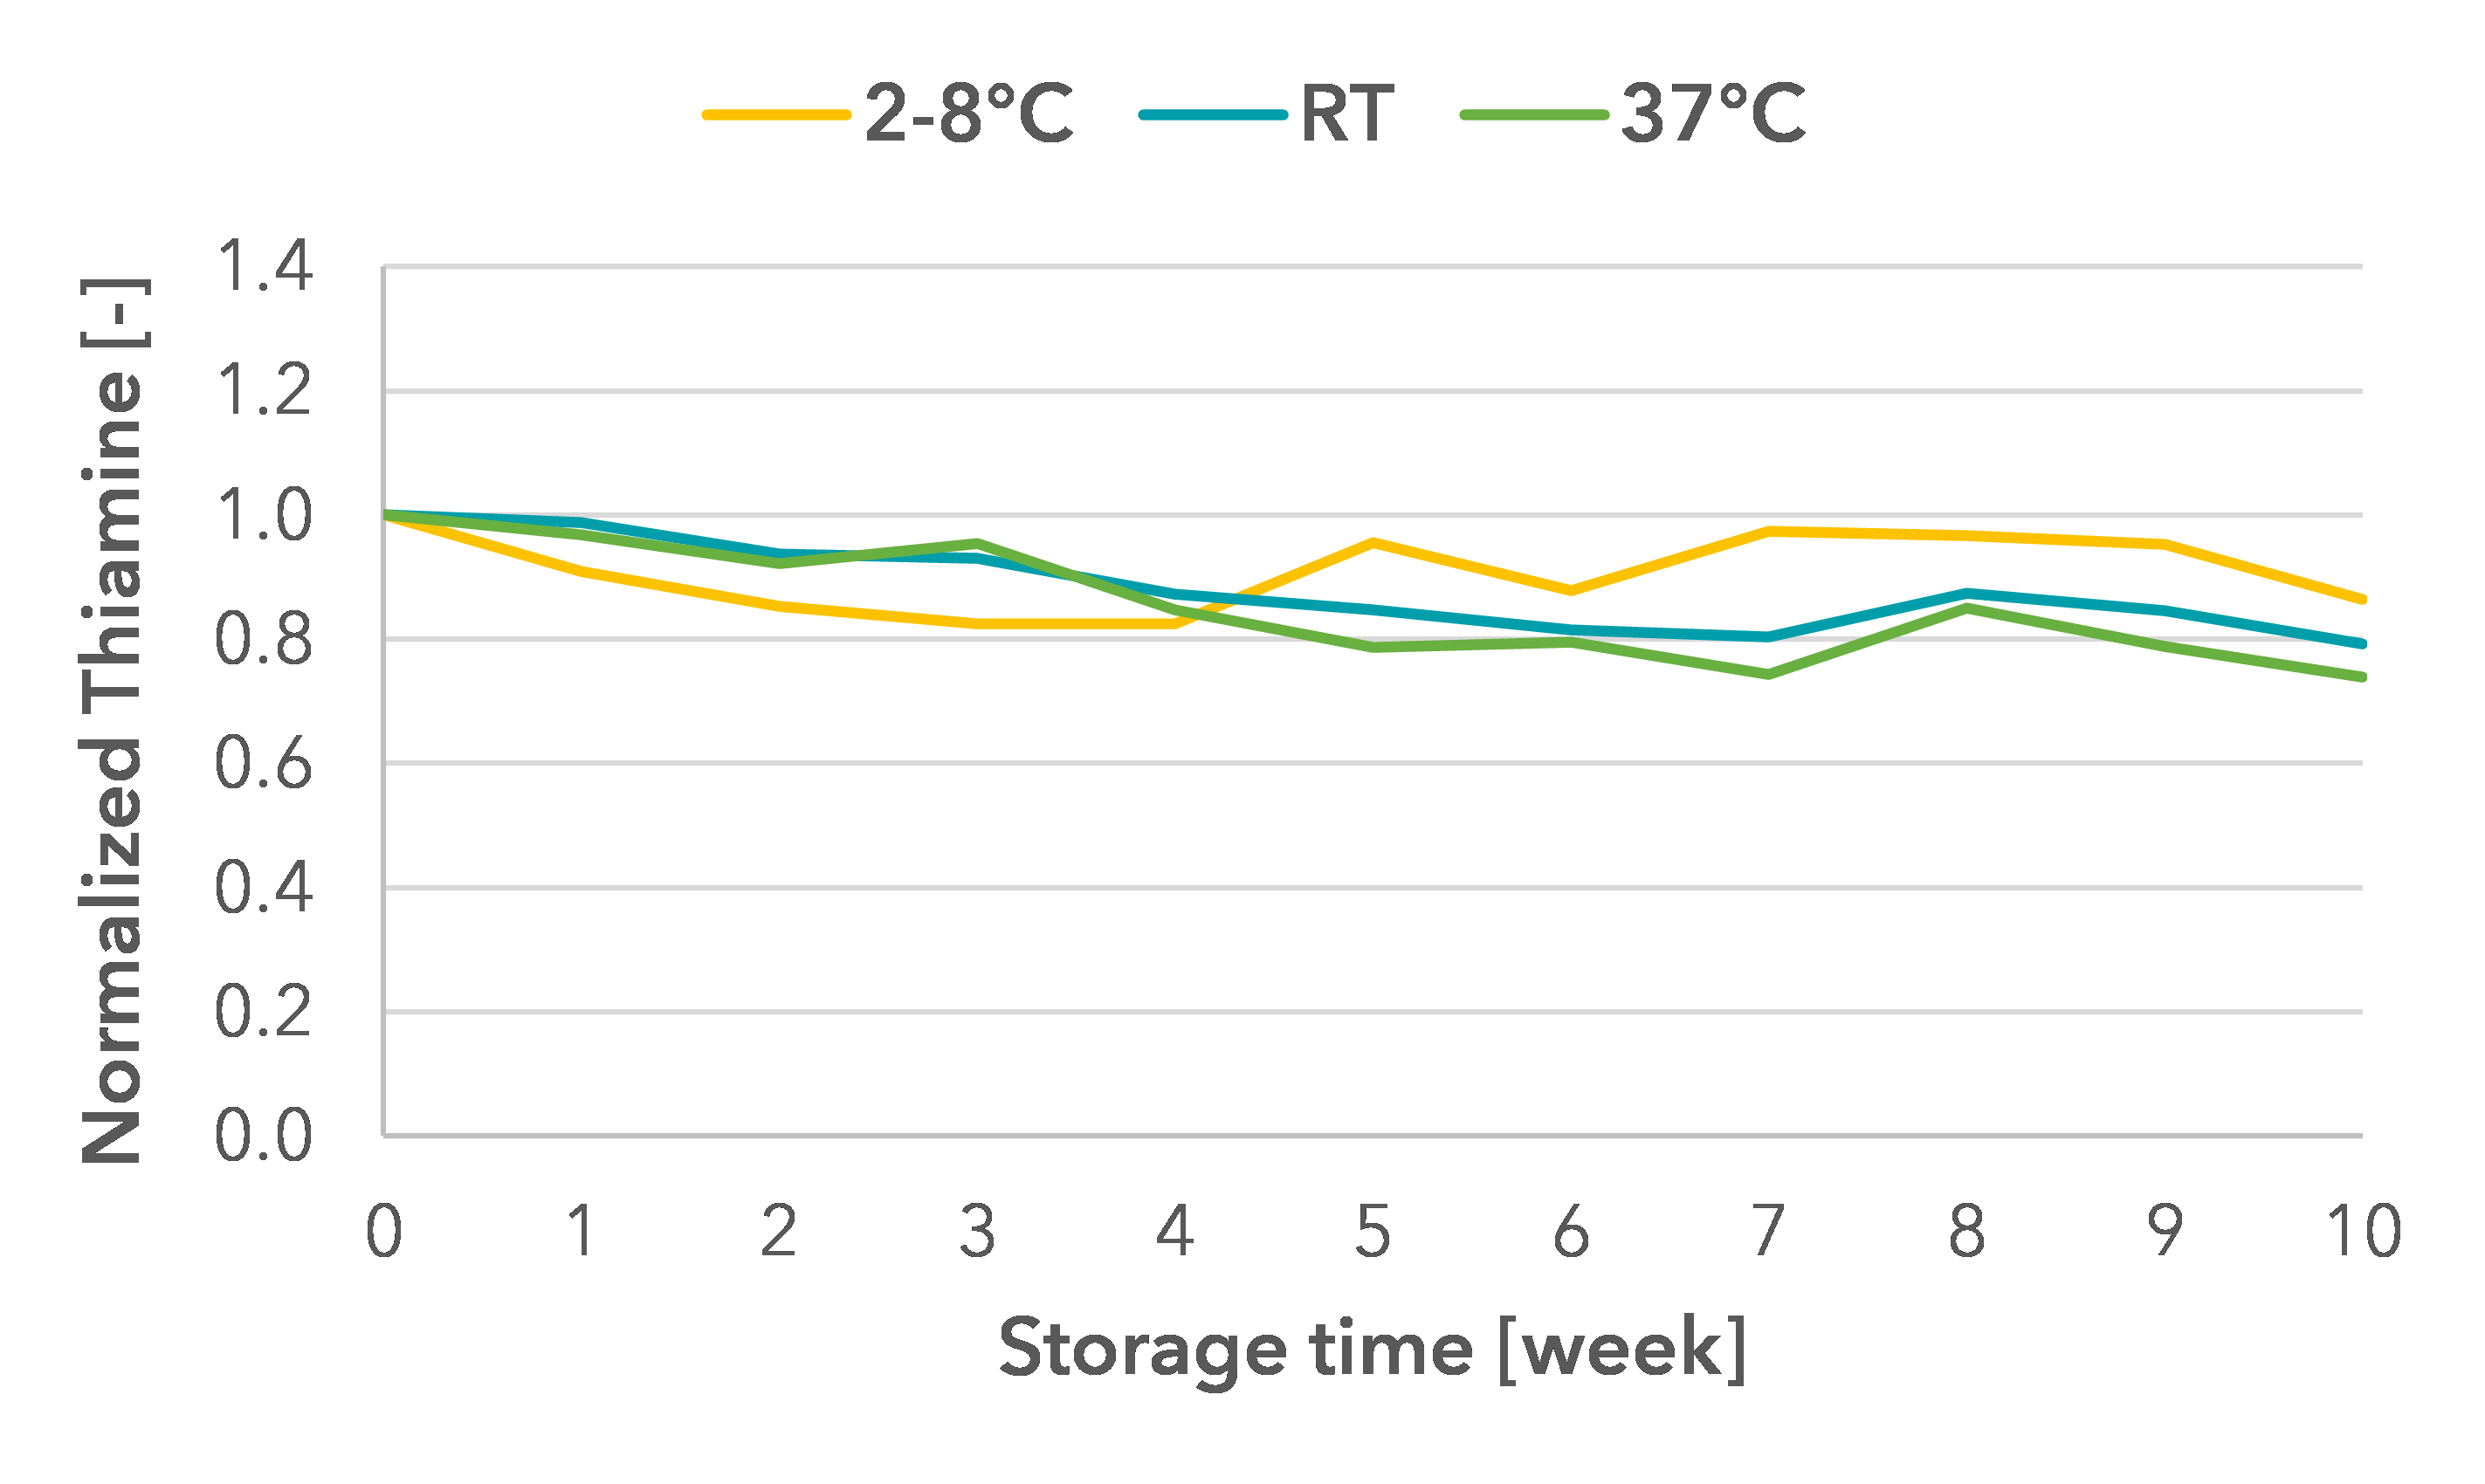 Normalized thiamine data over 10 weeks at temporarily deviating storage conditions (RT = room temperature or 37°C) compared to the recommended storage at 2-8°C, as an example for a known less stable vitamin.